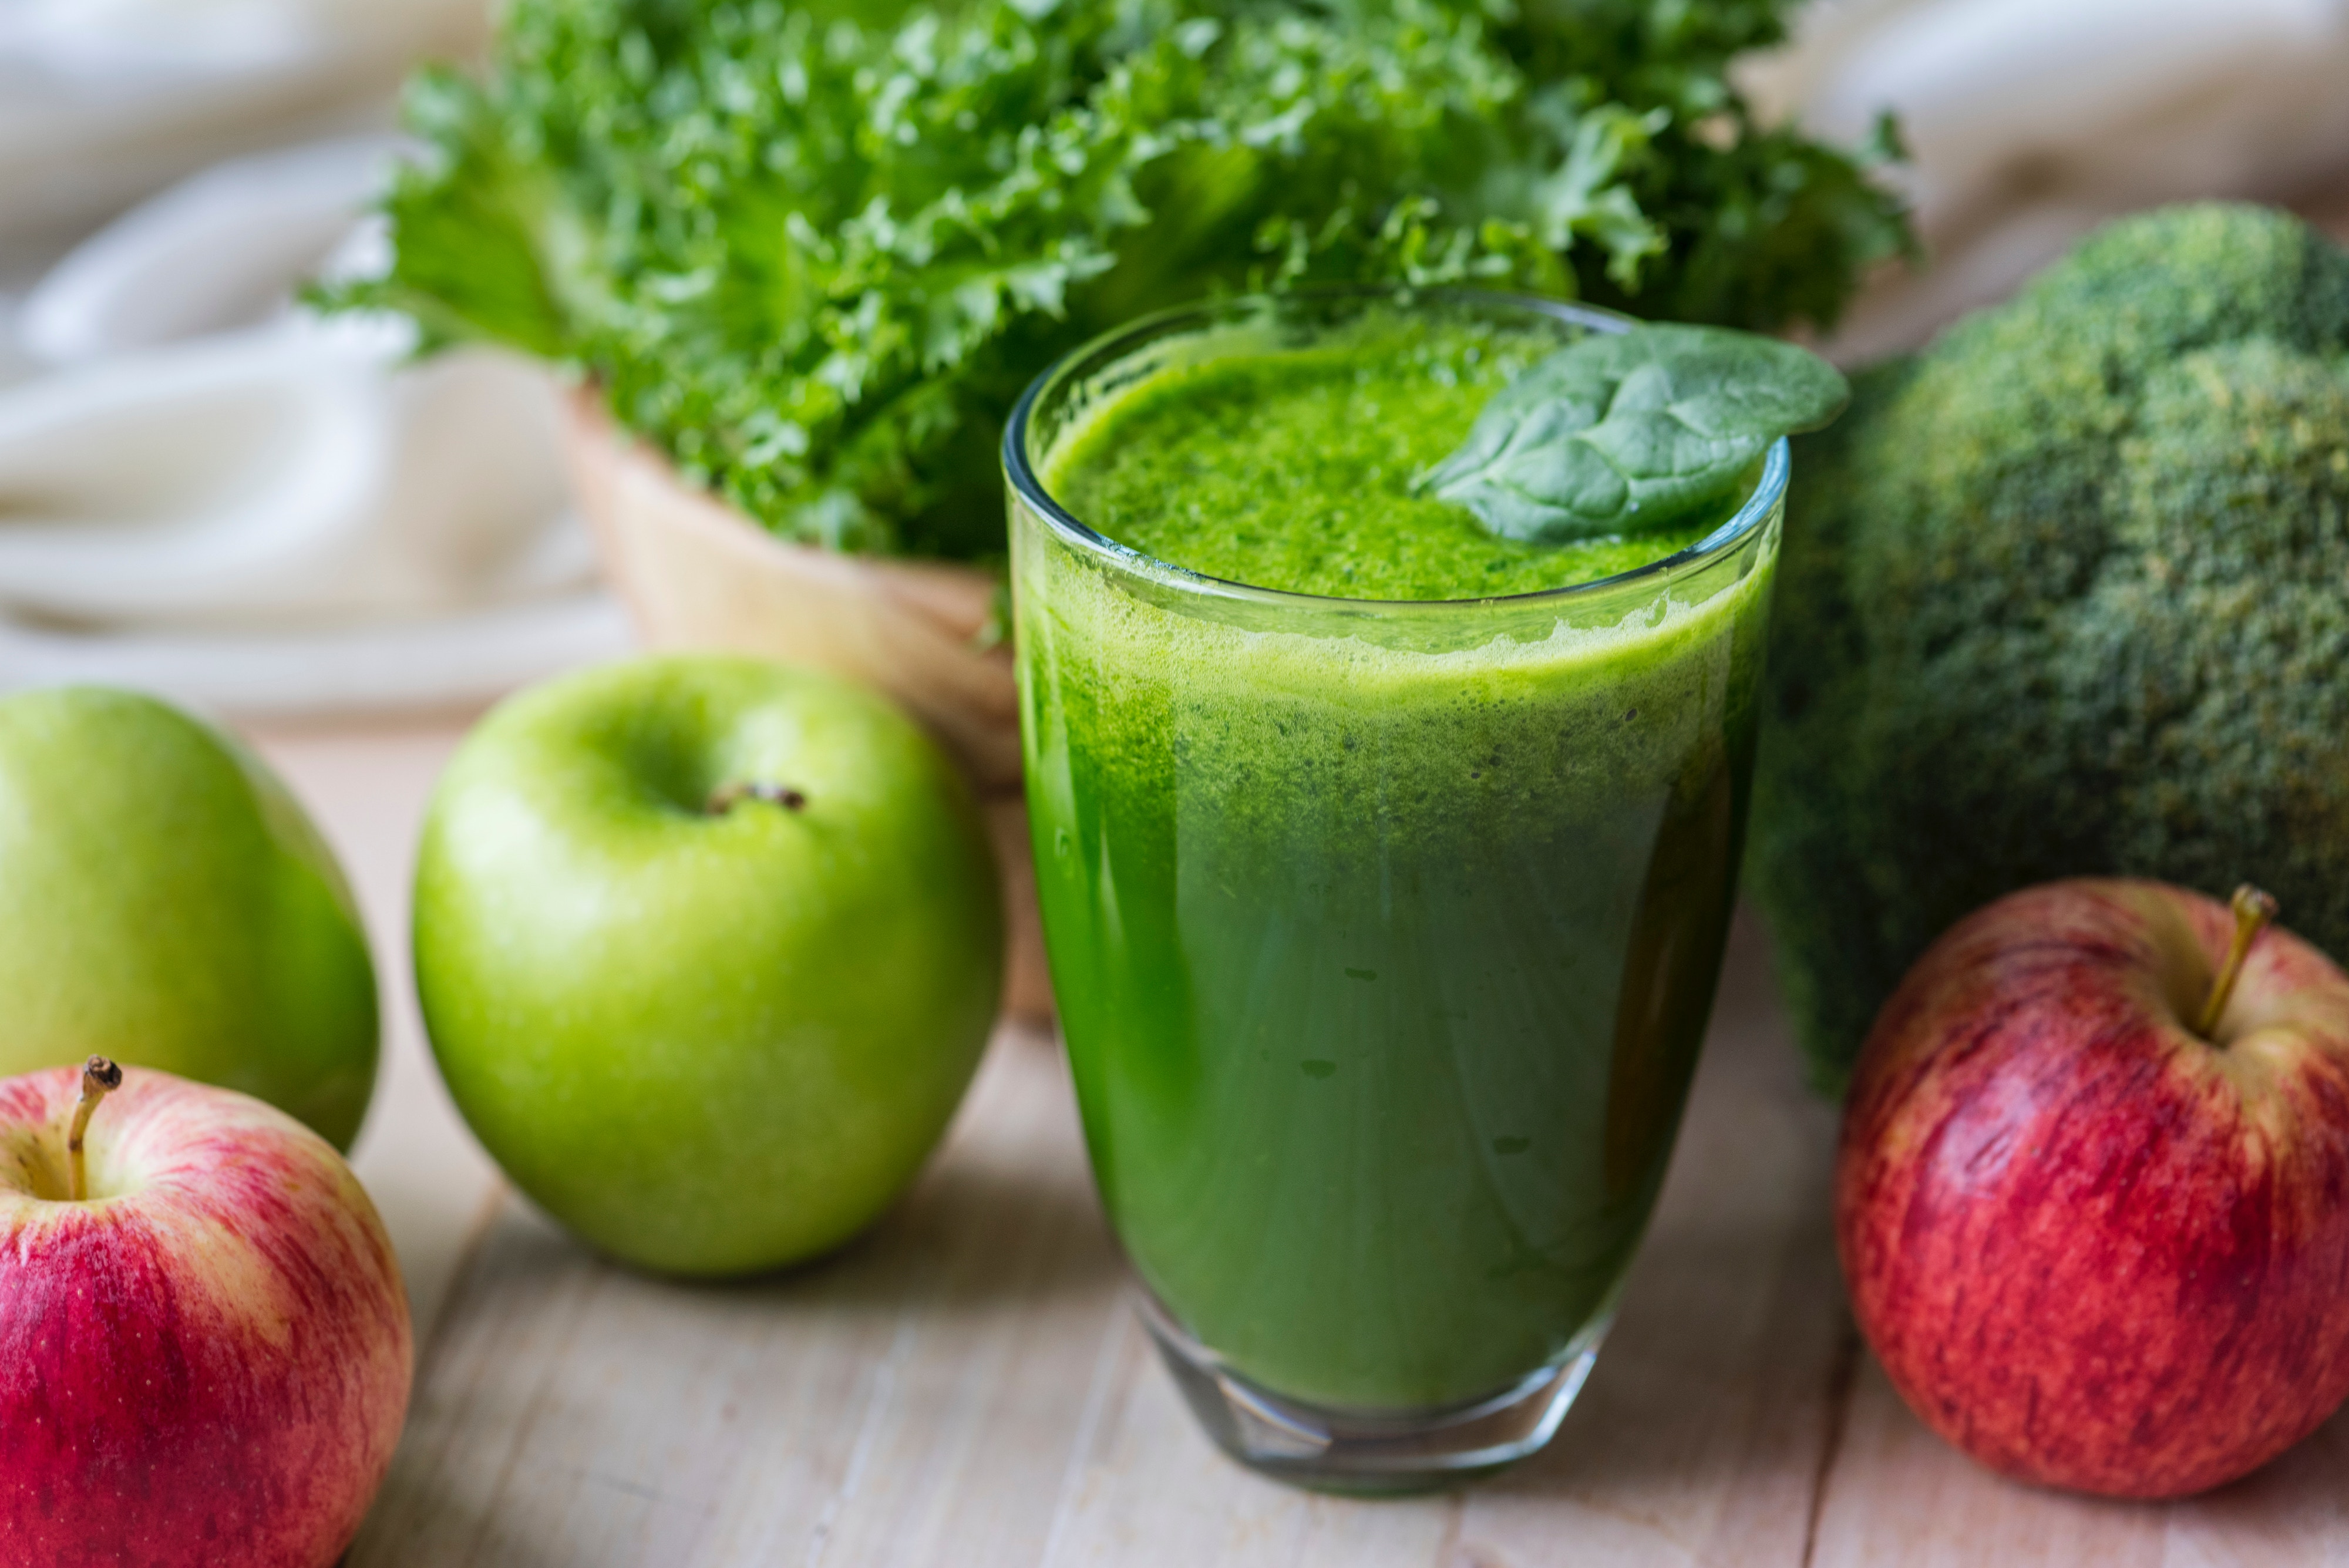 Apple and Green Juice. https://www.wocdetox.com/juice-cleanse.html